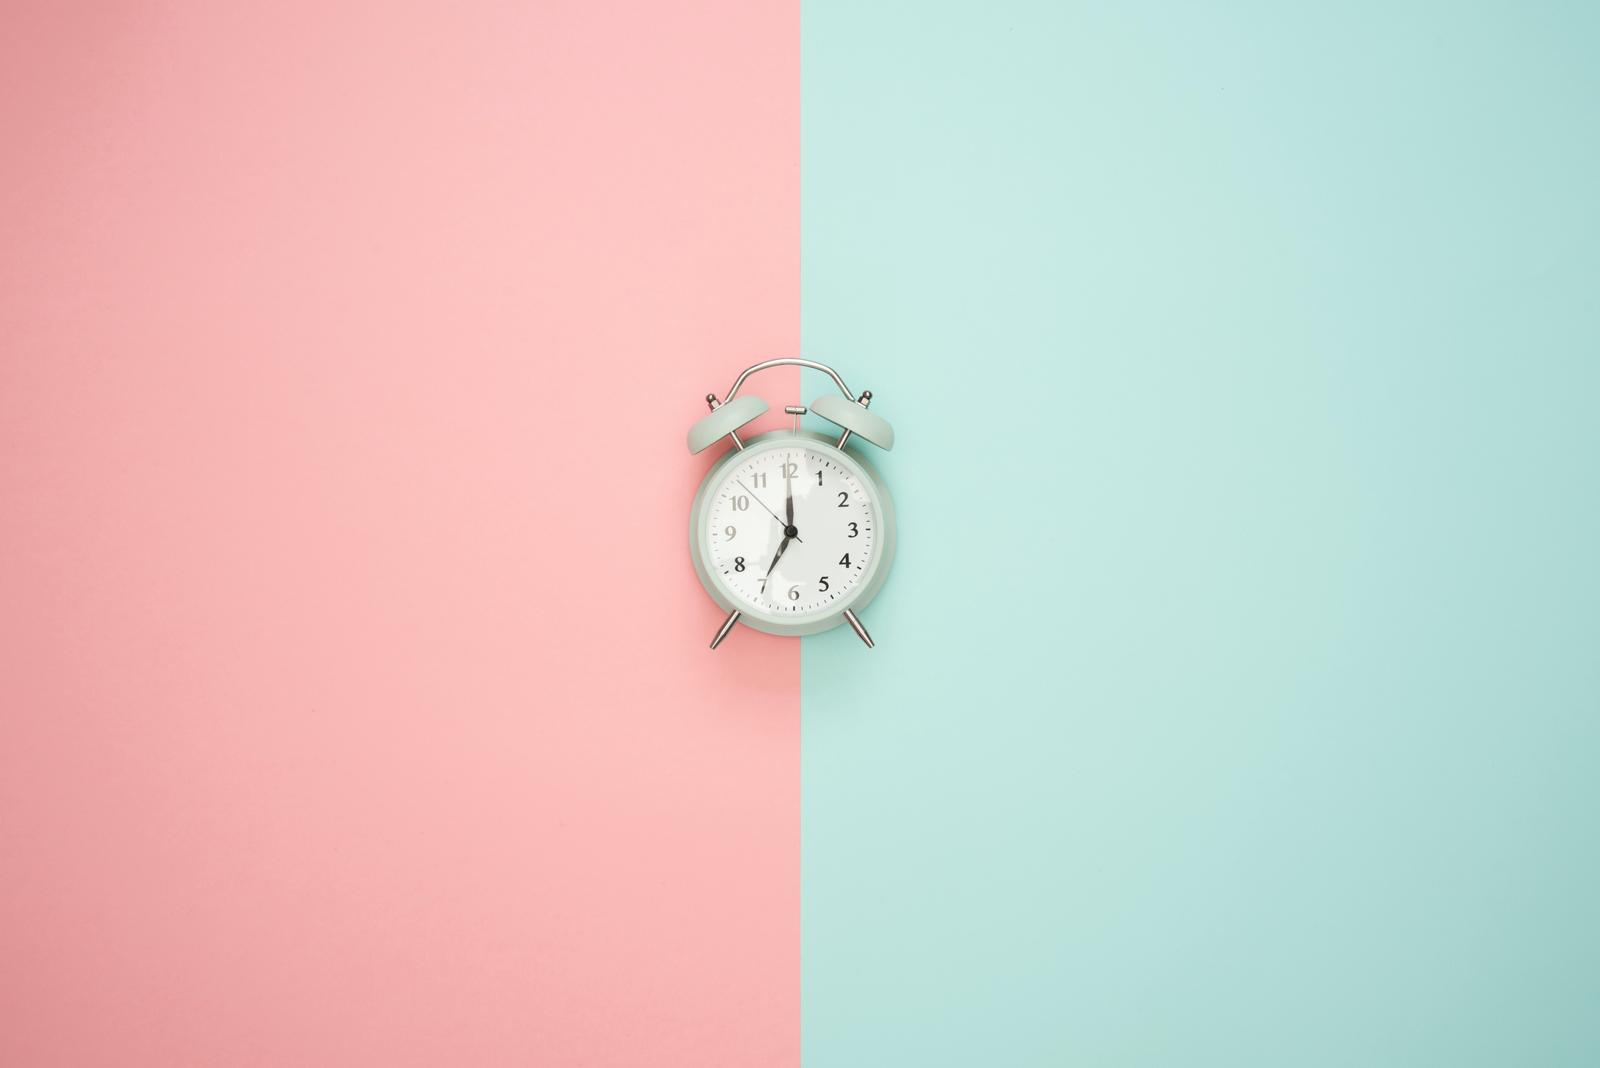 Clock lying on pink and blue pastel background